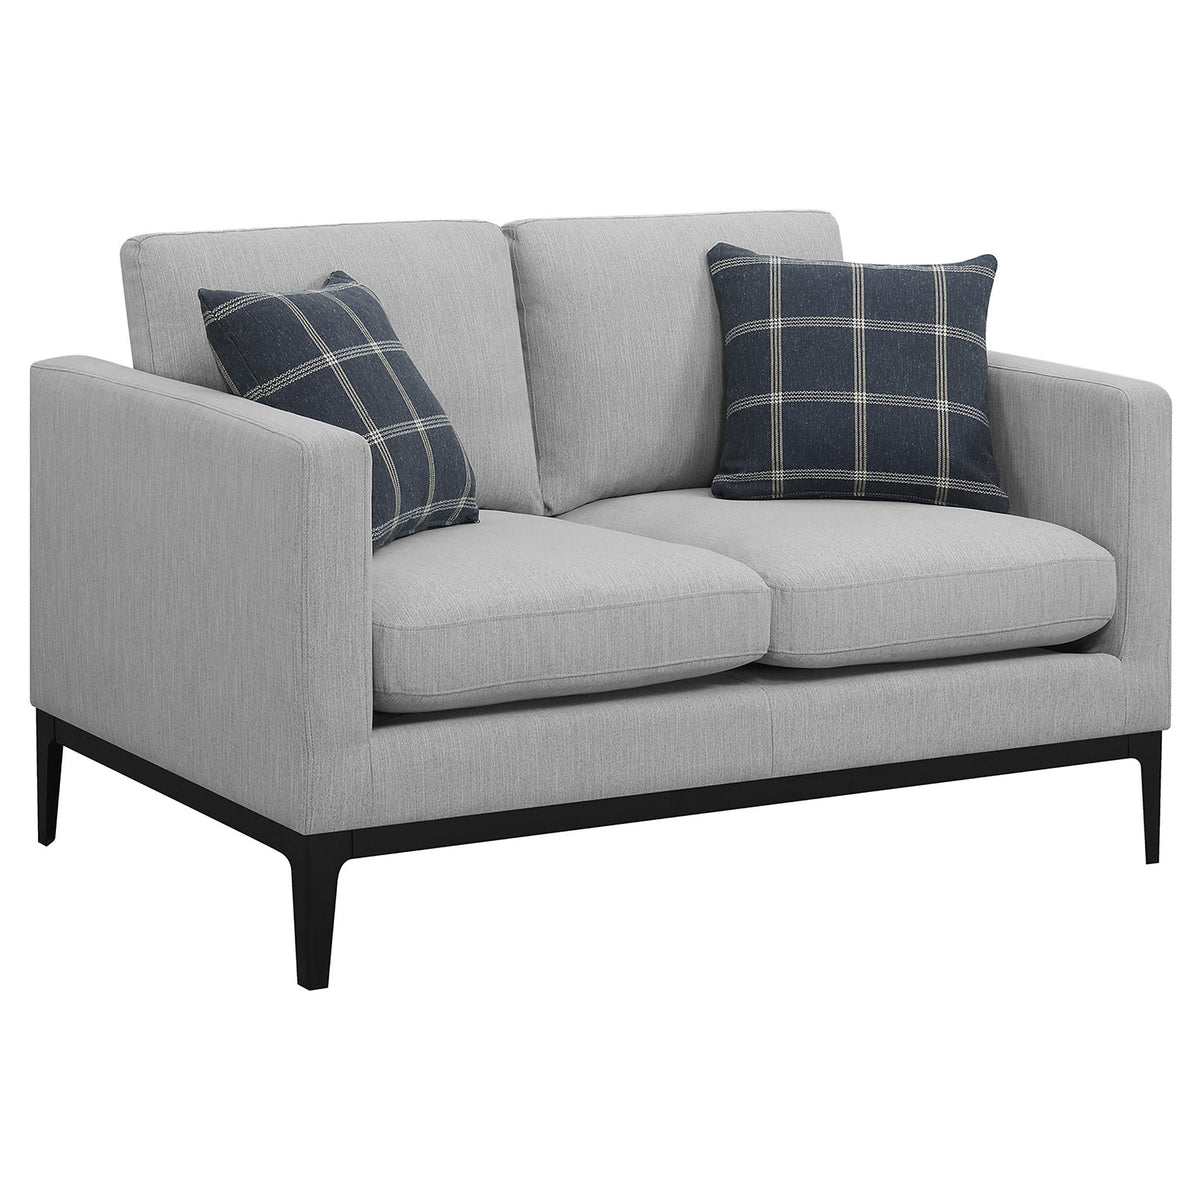 Apperson Cushioned Back Loveseat Light Grey Apperson Cushioned Back Loveseat Light Grey Half Price Furniture